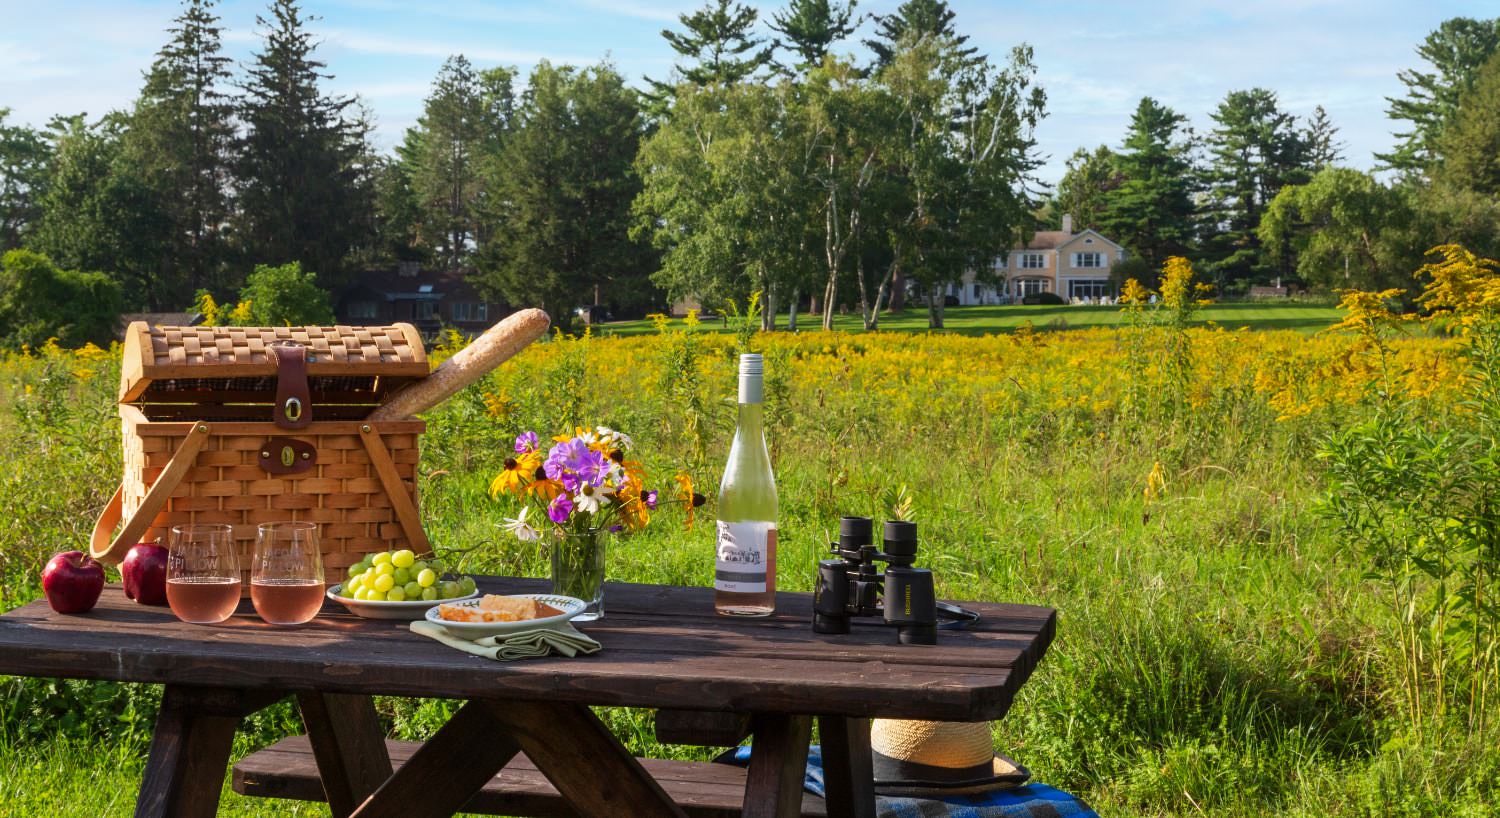 Wooden picnic table with picnic basket, apples, grapes, bottle of wine, vase with flowers, binoculars, and the property far in the background